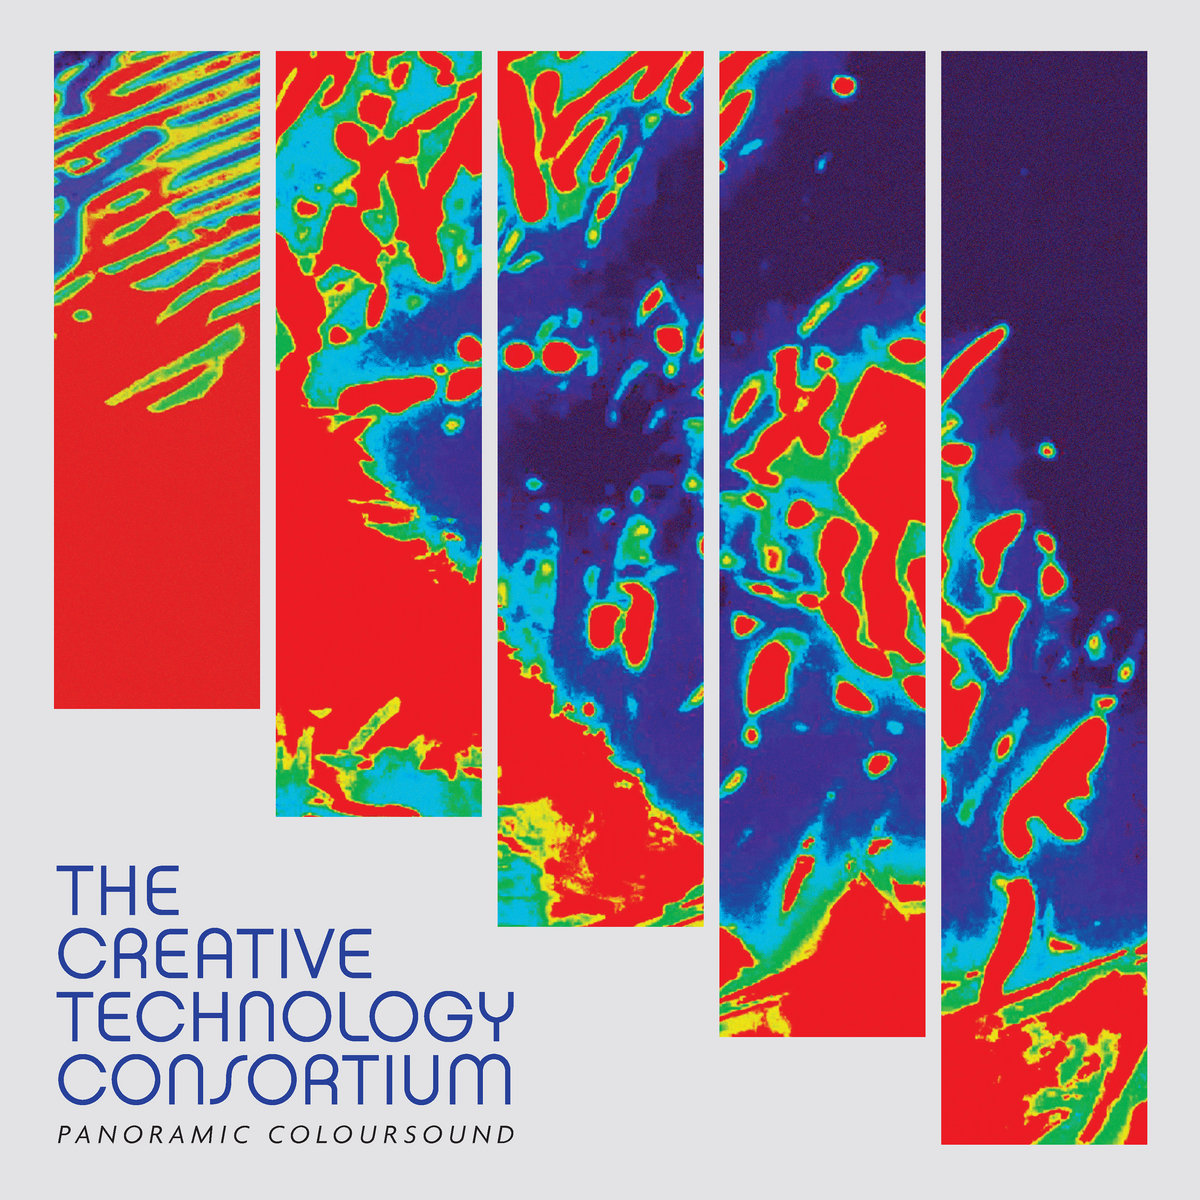 The Creative Technology Consortium – Panoramic Coloursound